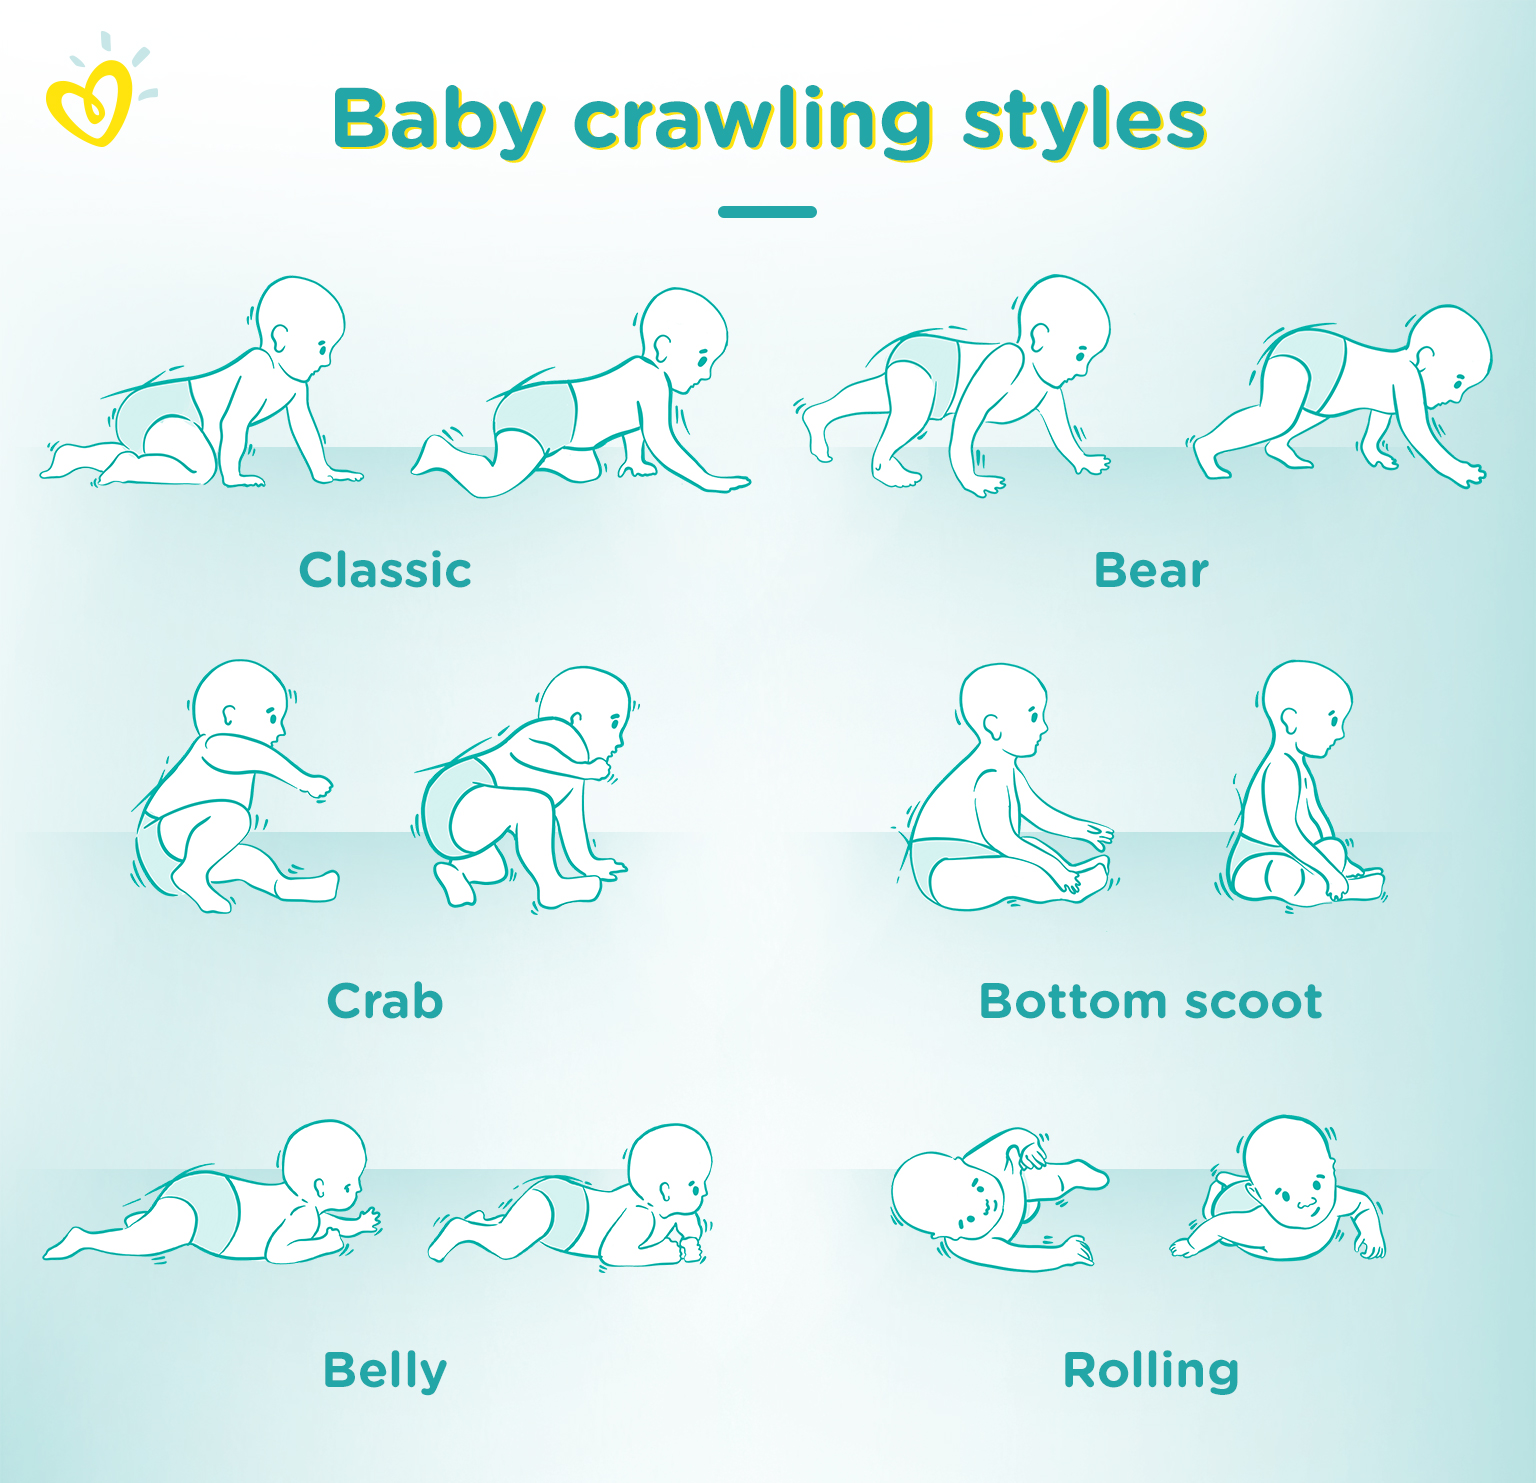 What is the earliest age crawling?